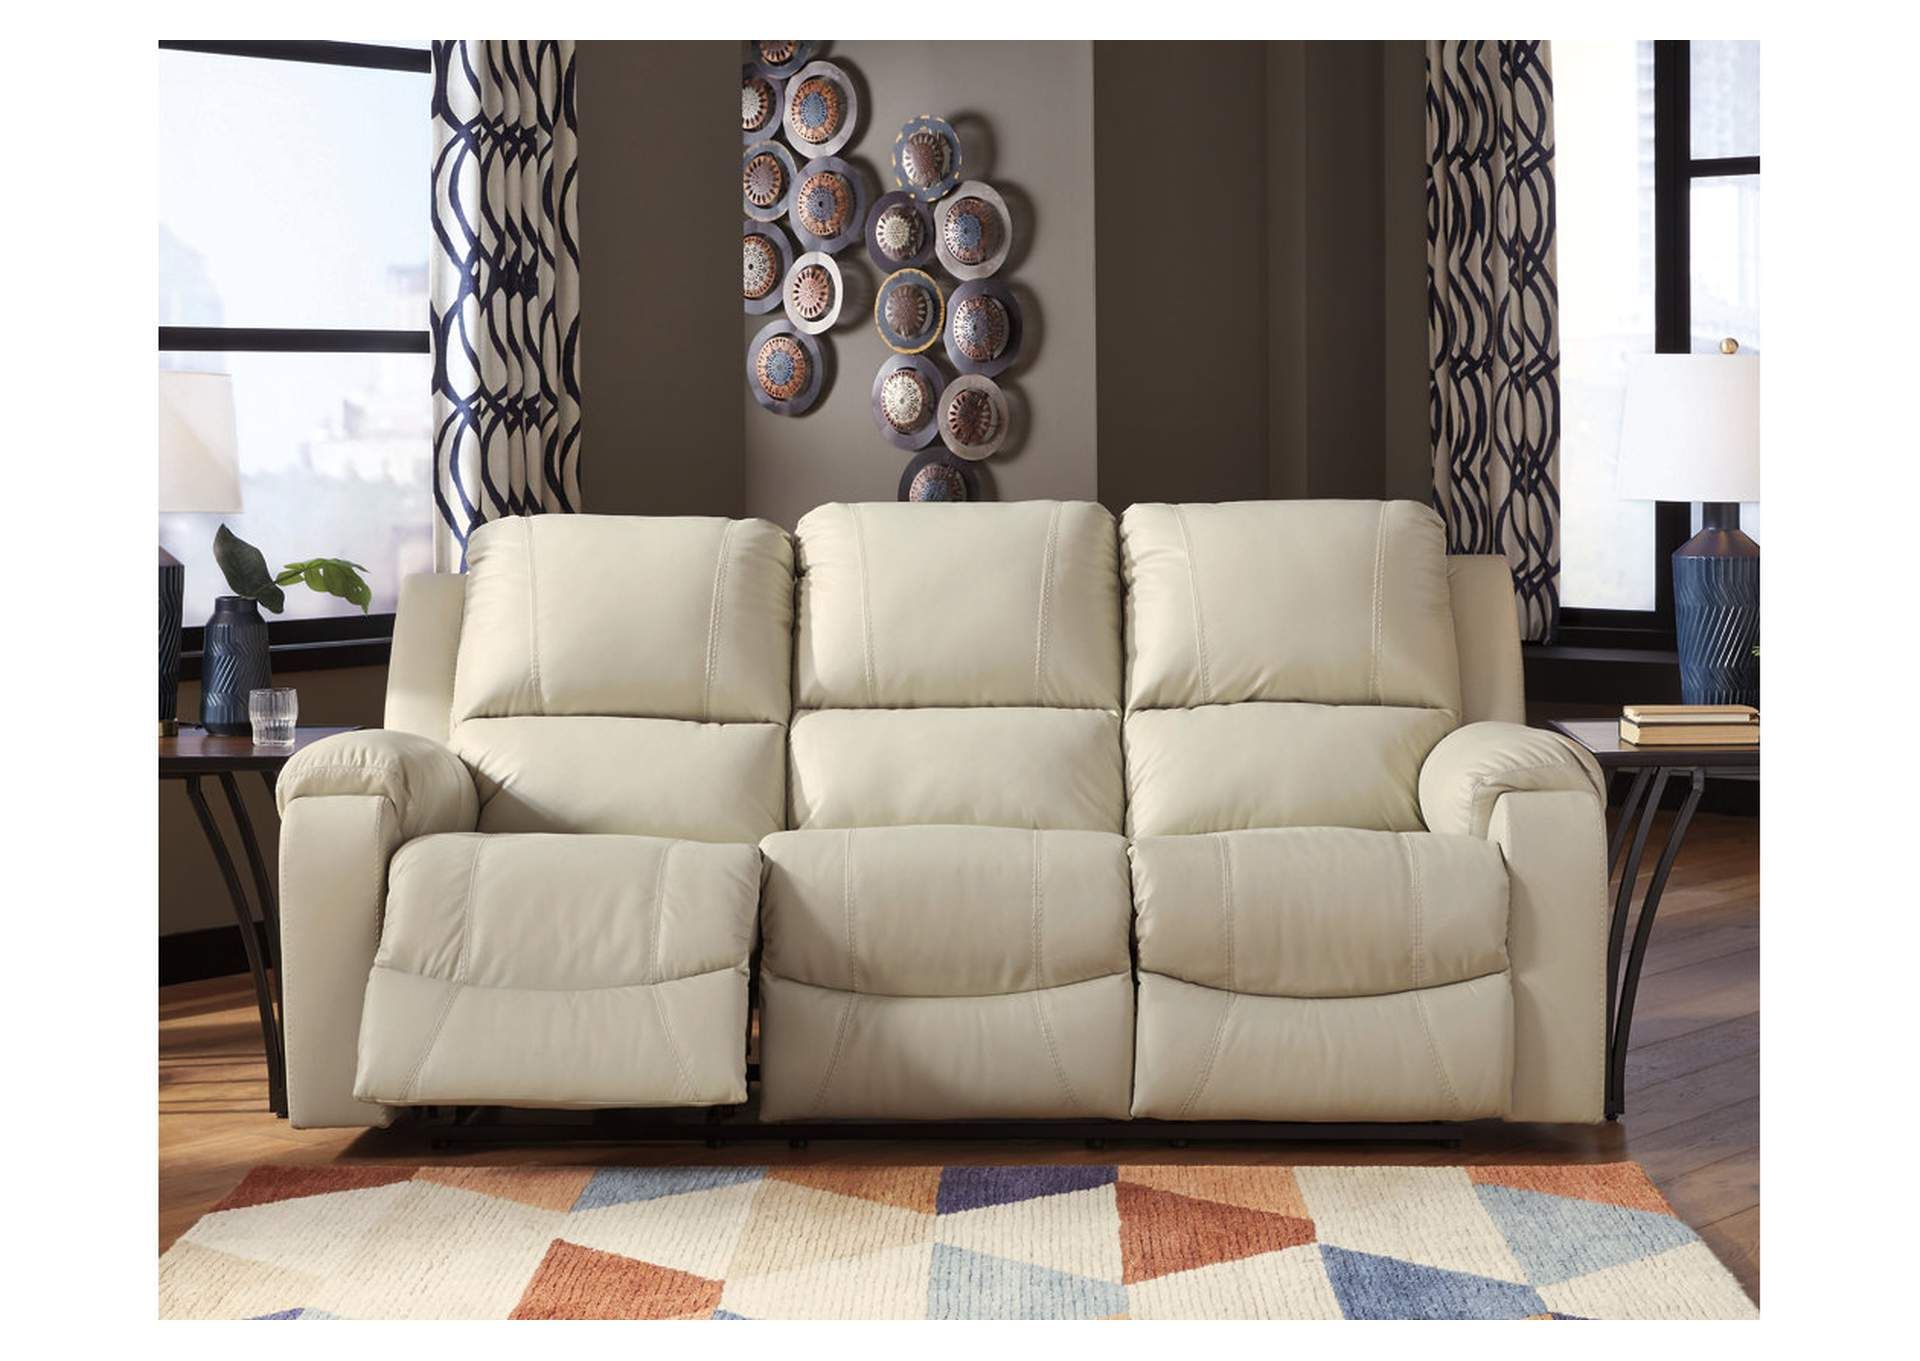 Brown/beige Rackingburg Reclining Sofa Spiller Furniture & Mattress In Preferred Round Beige Faux Leather Ottomans With Pull Tab (View 8 of 10)